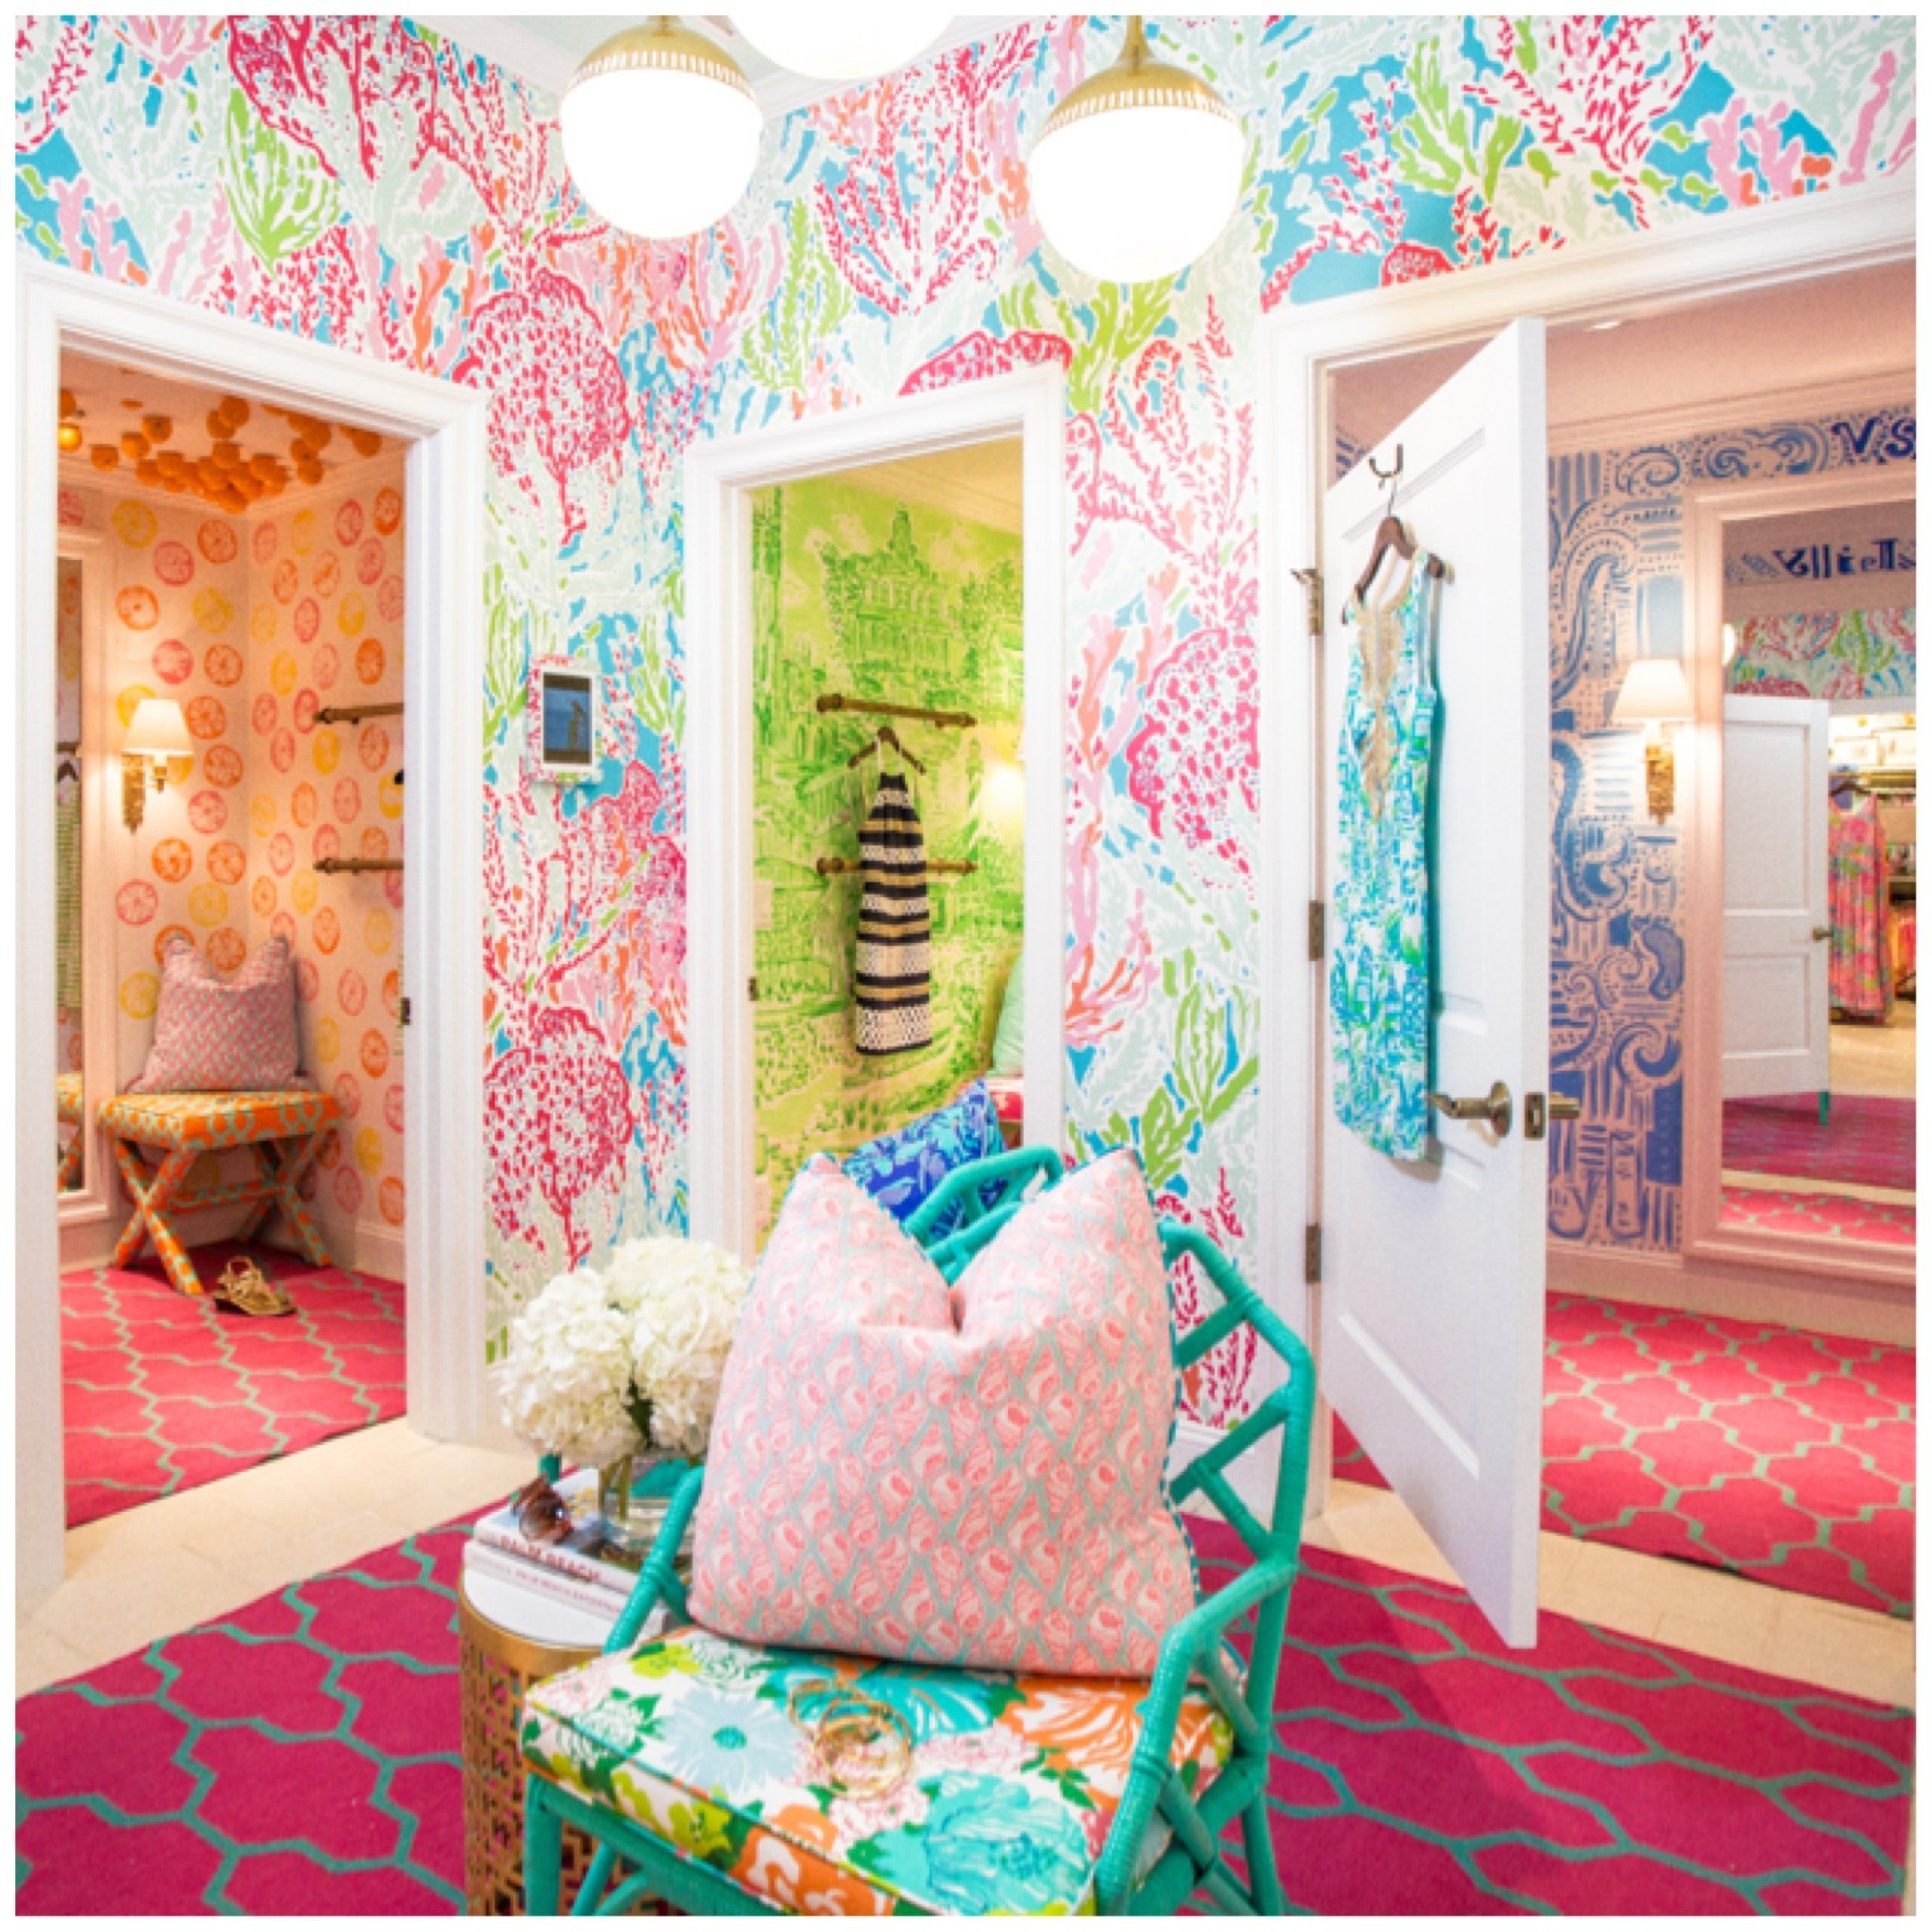 1936x1936 Shapely Image Lilly Pulitzer Bedroom Ideas Preppy With Home Accessories  Decor 6